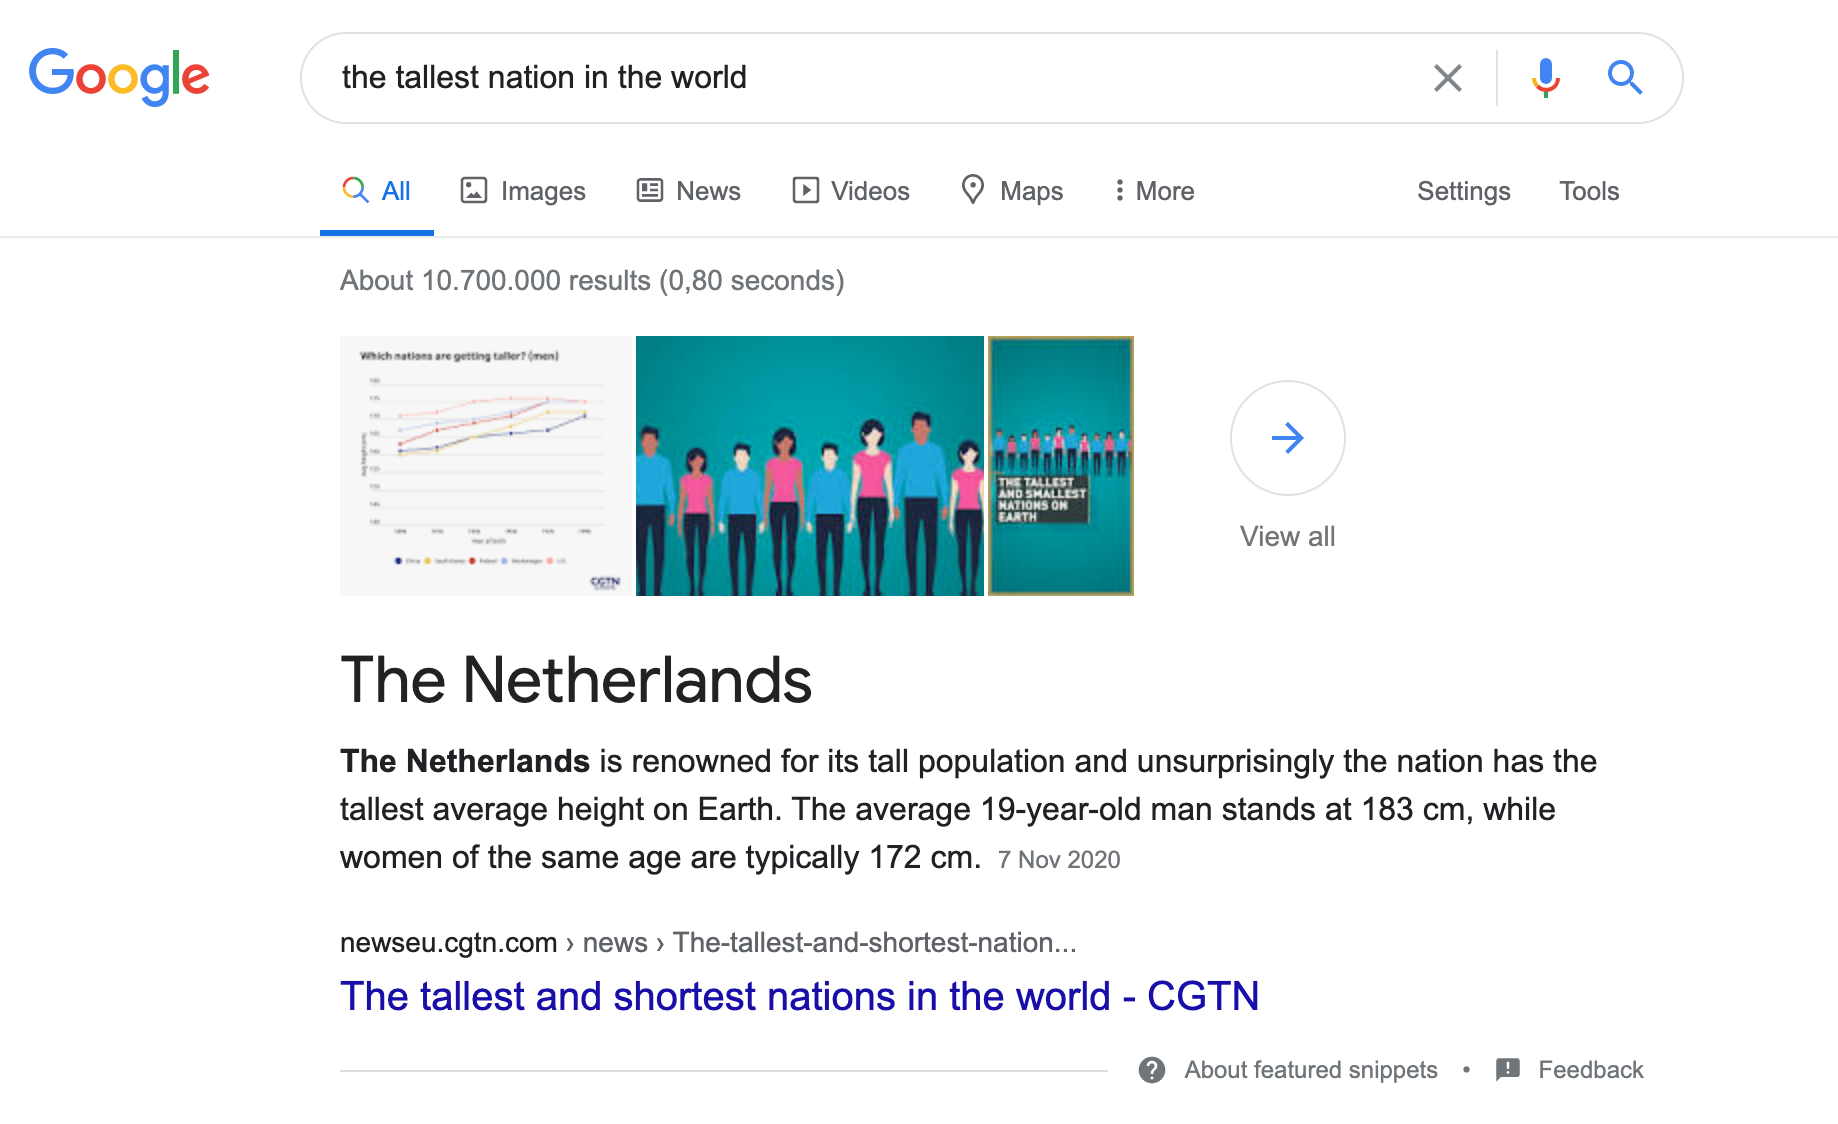 The tallest and shortest nations in the world - CGTN